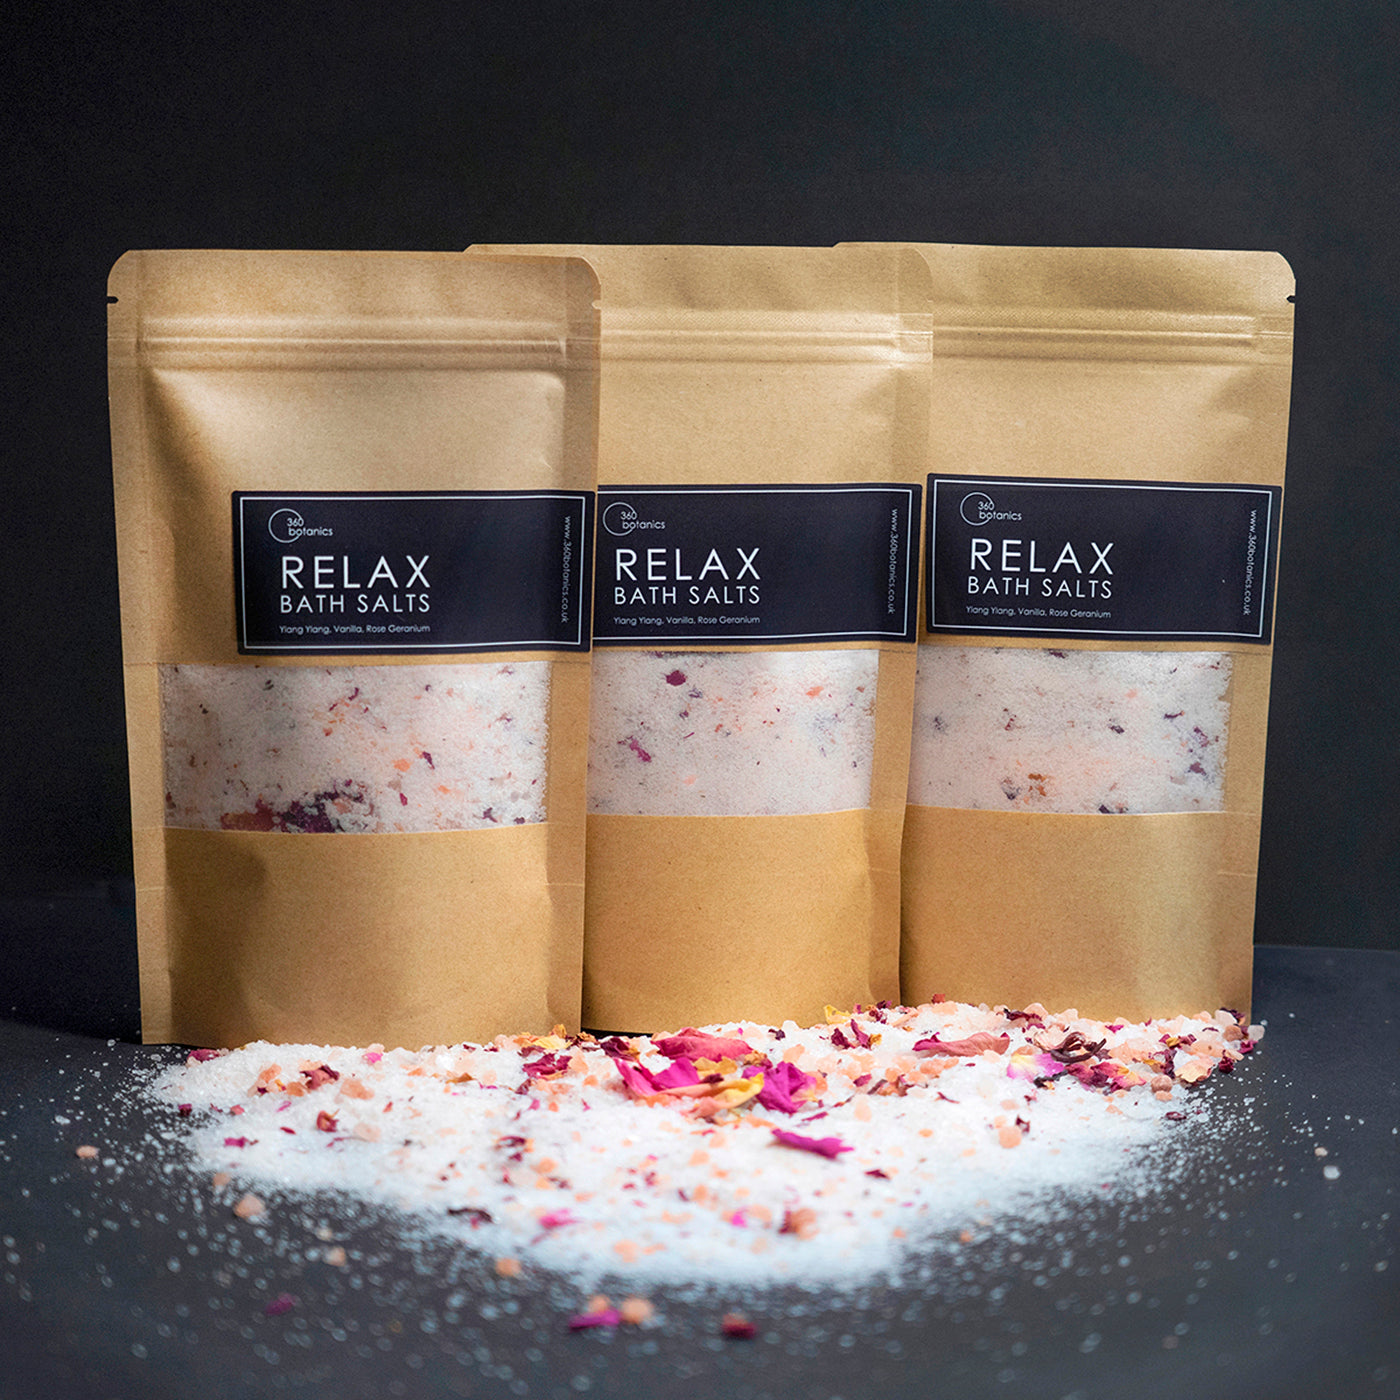 Three pouches of "360 Botanics RELAX Bath Salts" with visible layers of salt and dried flower petals, standing against a dark background with a scattering of bath salts and petals in front of them.